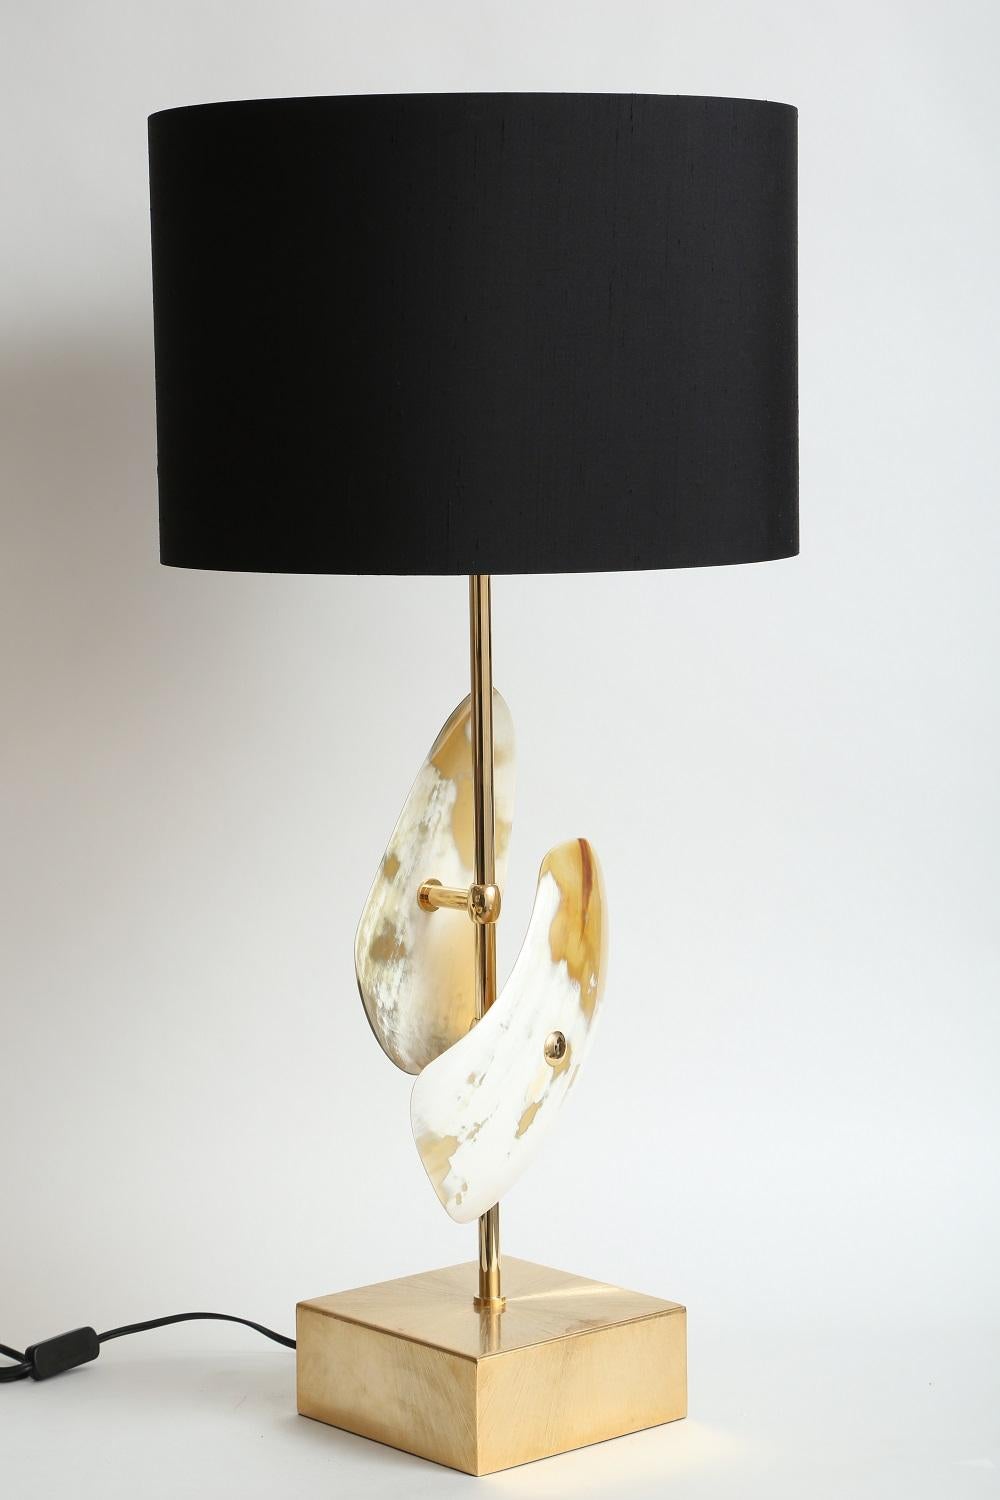 Arcahorn table lamp with horn details and brushed gilded brass base, made in Italy.
Dimensions:
7.87” x 7.87” x 26.77” H.
Black fabric lampshade D 21.65” x 13.77” H.
     